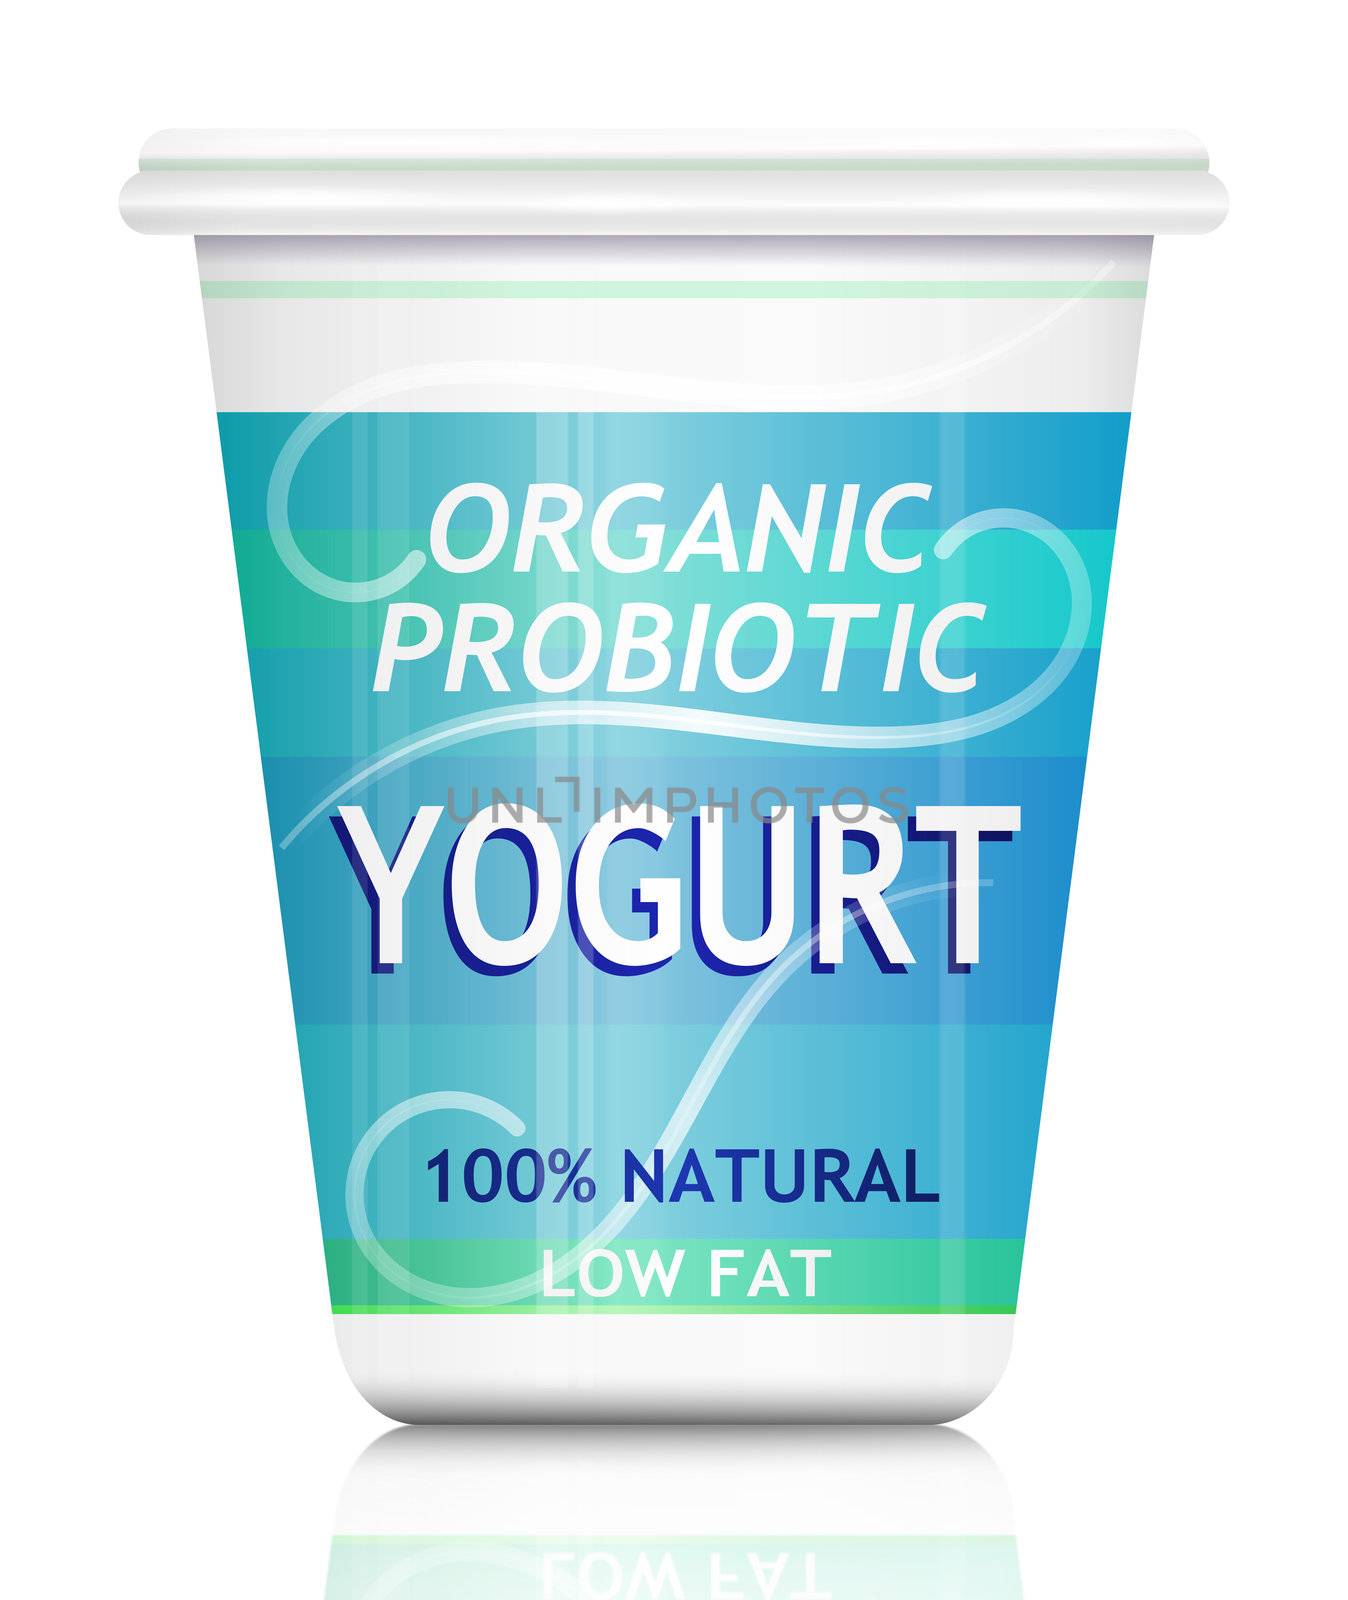 Illustration depicting a single organic probiotic yogurt container arranged over white.